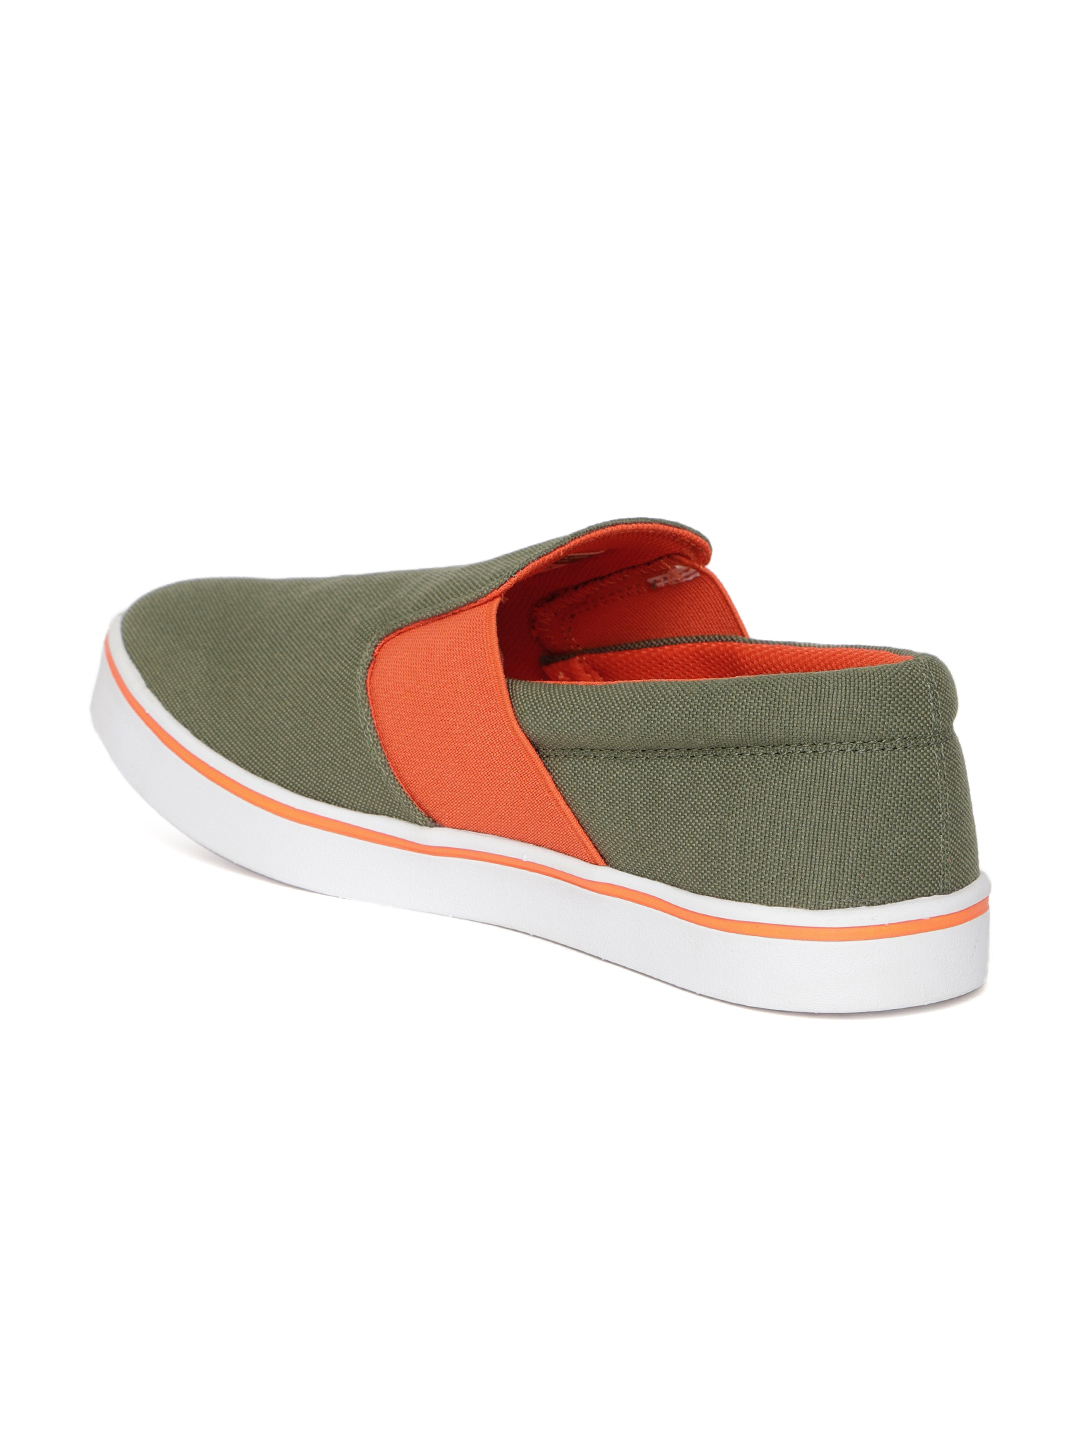 Buy UCB Men Olive Green Slip-On Sneakers Online @ ₹1259 from ShopClues